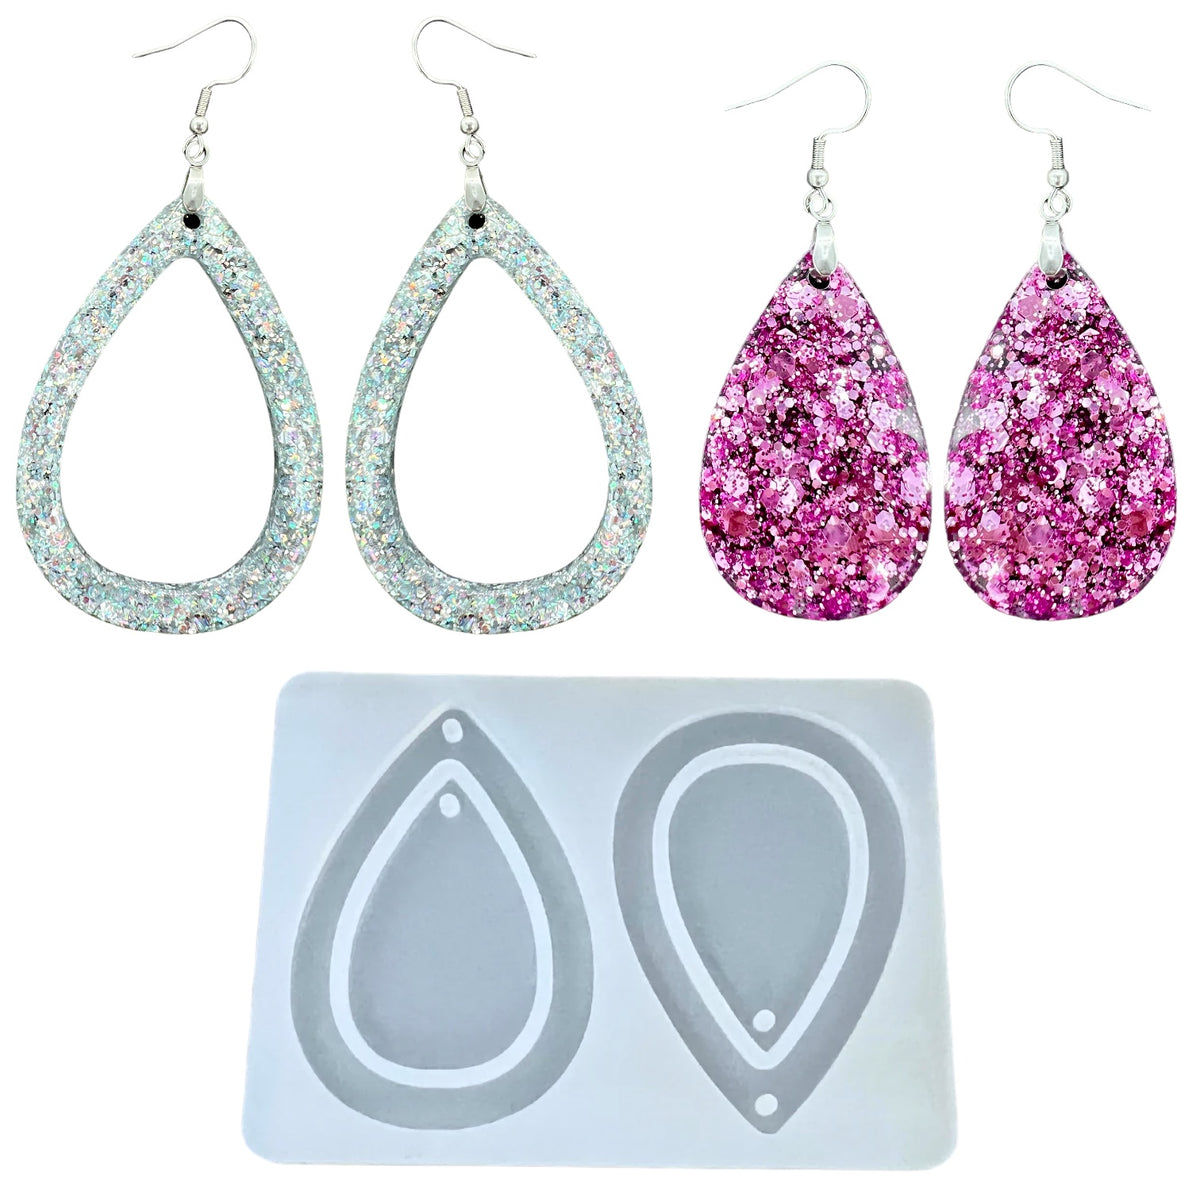 Resin Rockers Exclusive Premium Dual Teardrop Dangle Earring Mold for UV and Epoxy Resin Art Jewelry